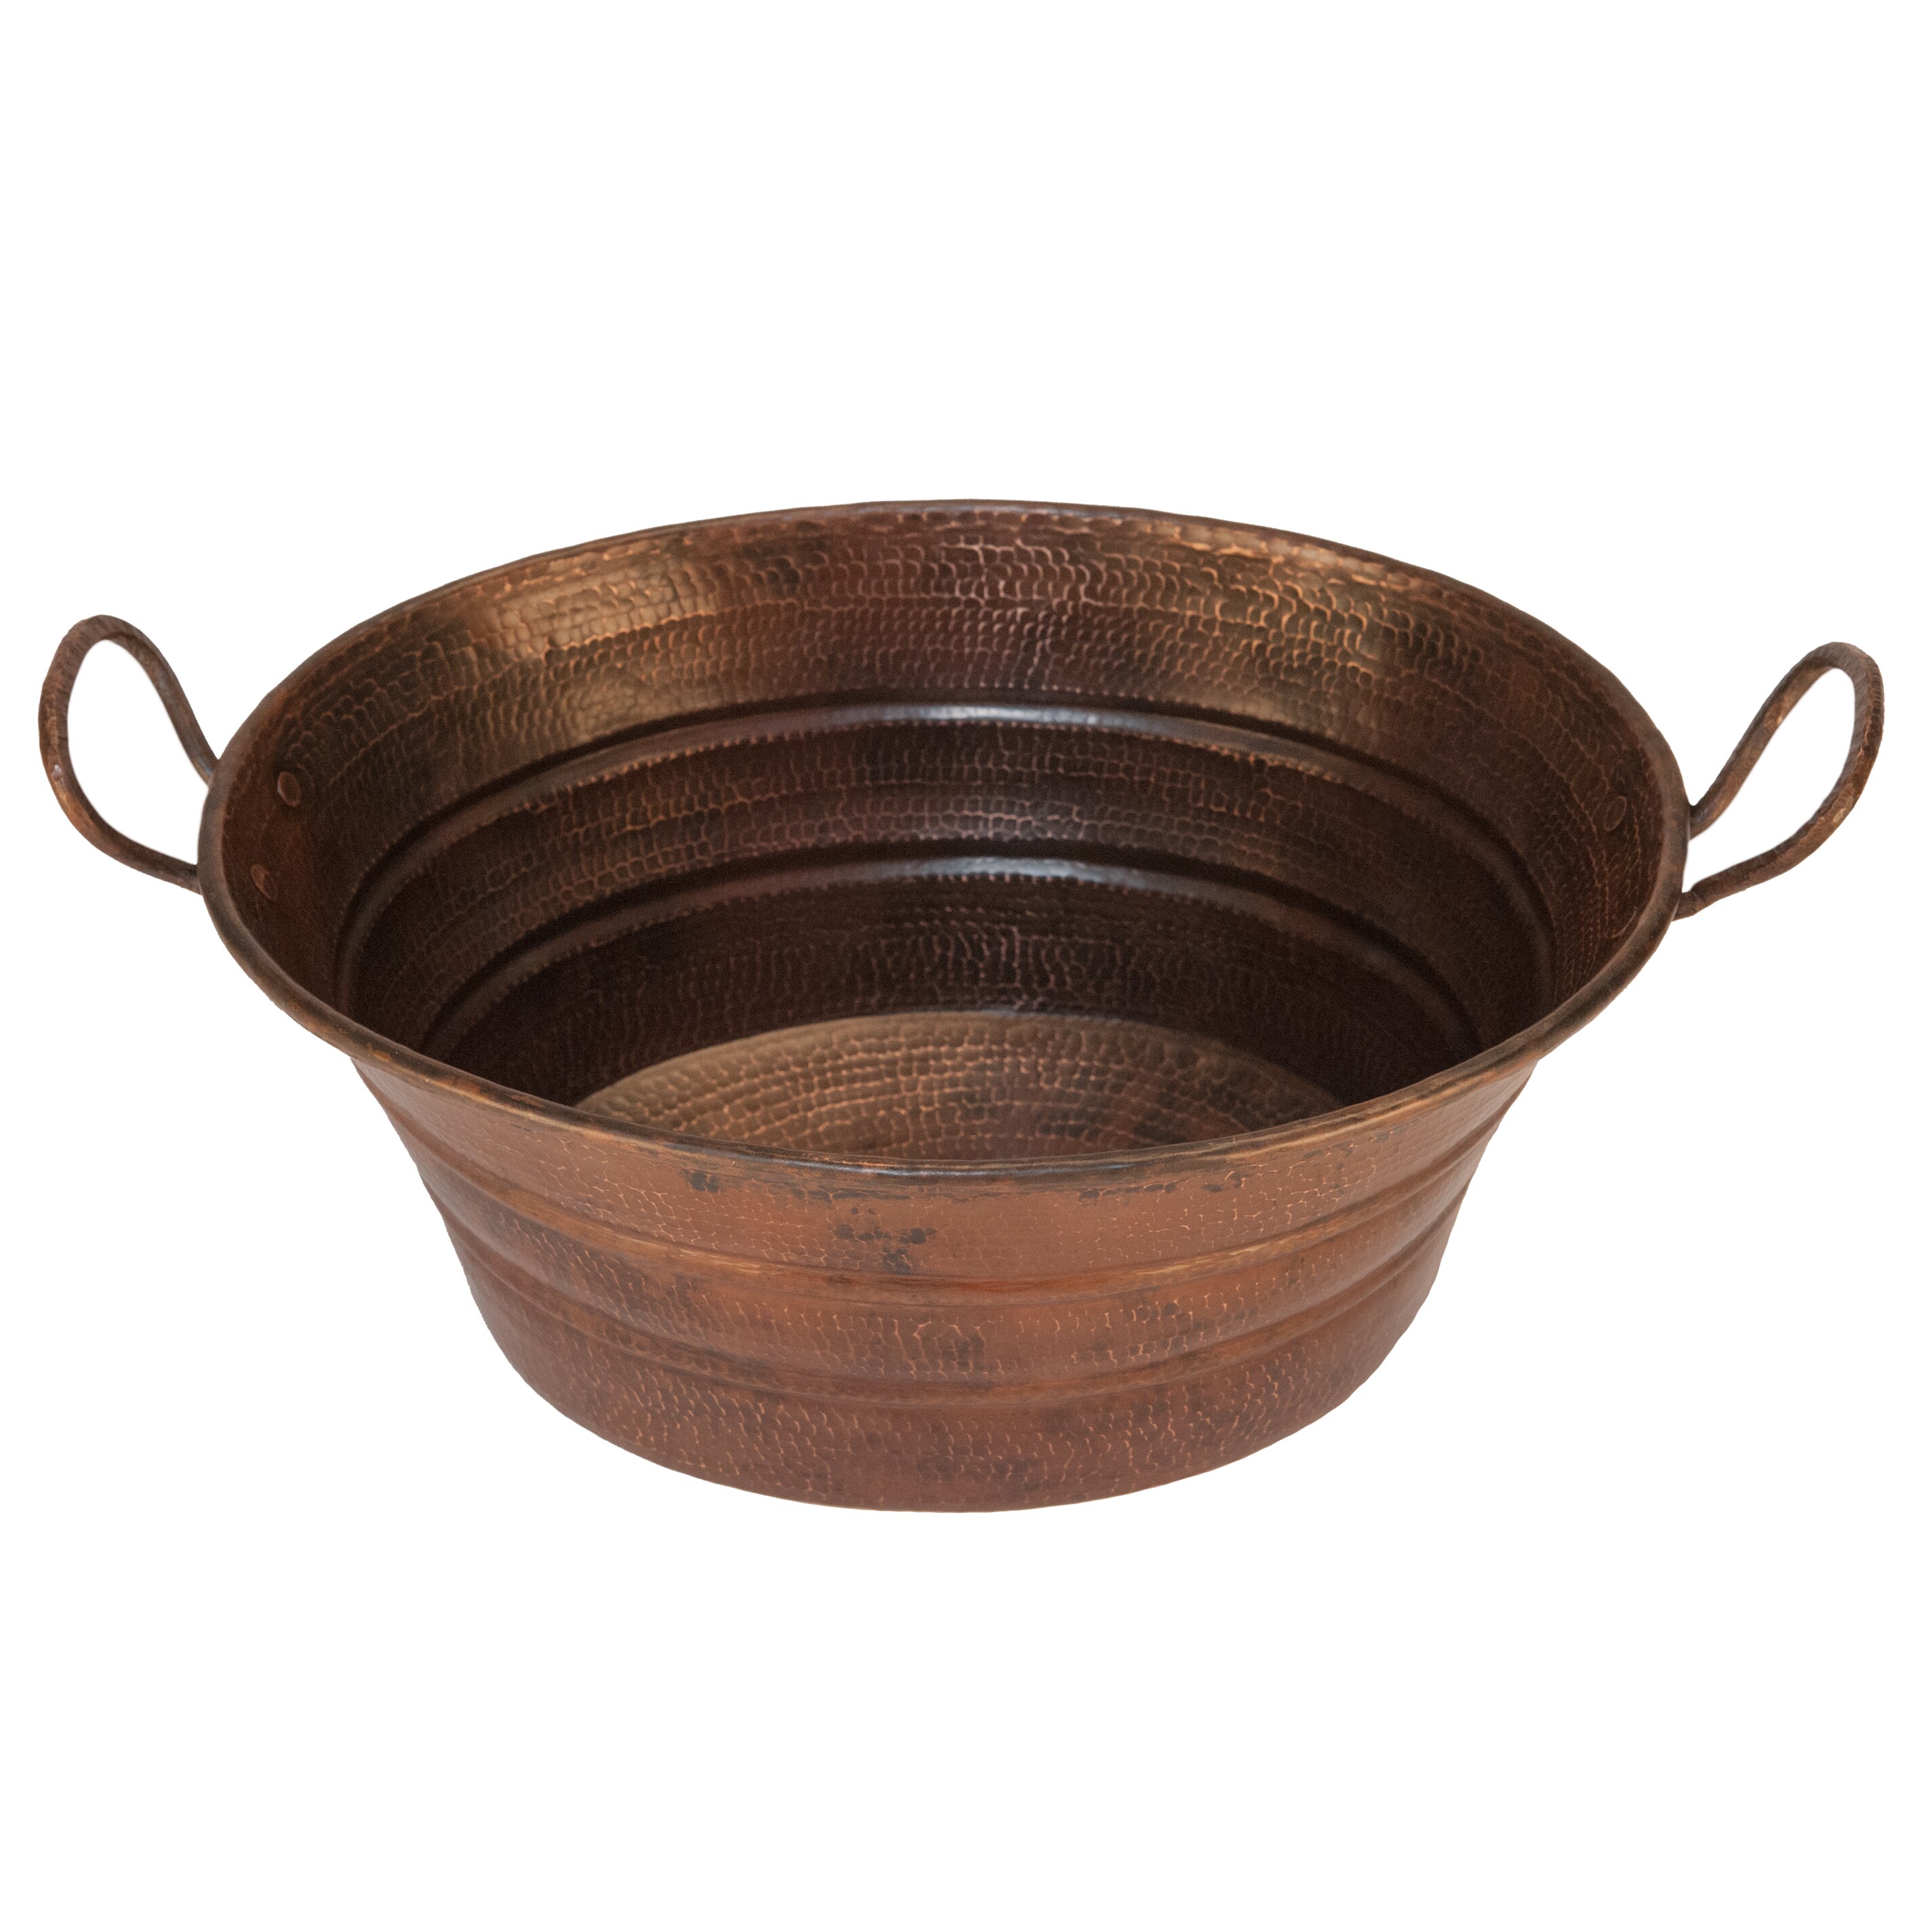 Premier Copper Products Oval Bucket Vessel Hammered Copper Sink With Handles